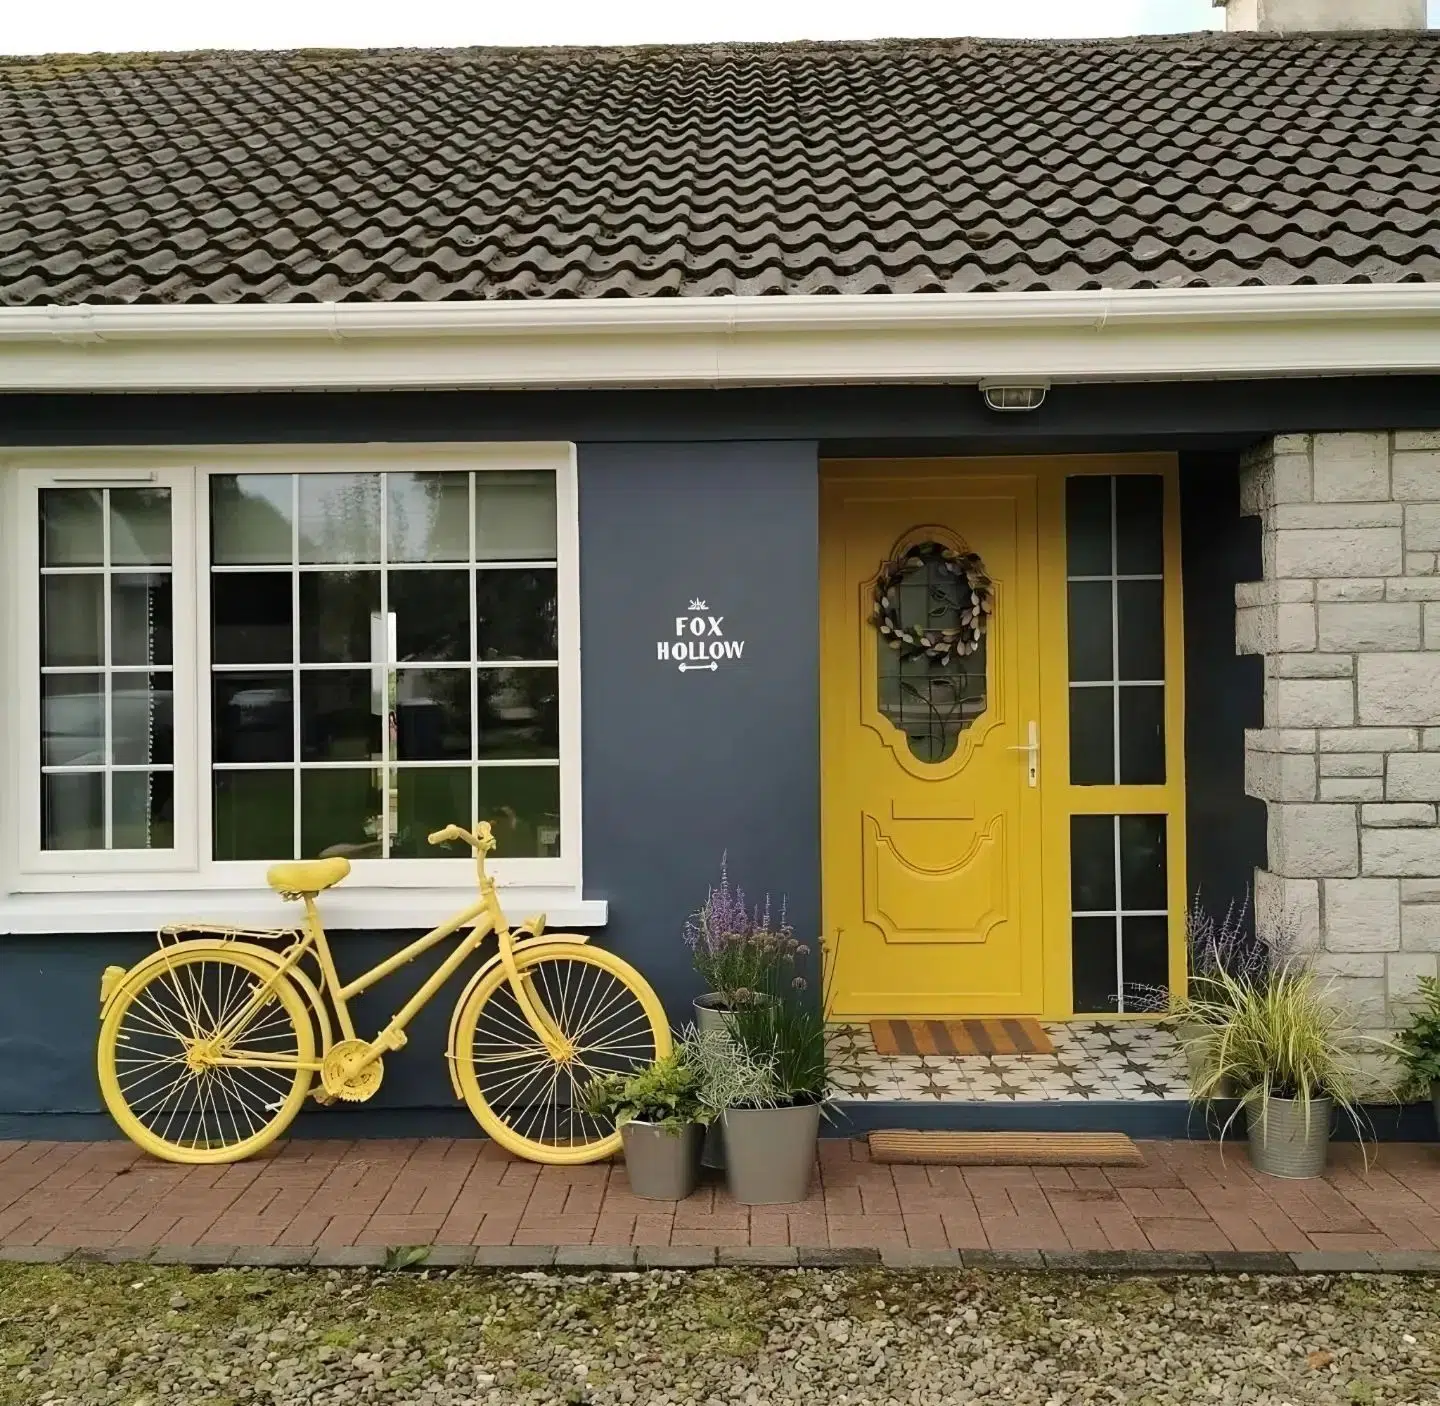 What a stunning project by @crownpaintsireland Style Guide Bronagh @foxhollowstyle using shades from the Crown MoodBoards palette with @houseandhomemagazine. Bronagh gave her exteriors a stylish and cheerful lift with a deep blue, a sunny yellow, and a crisp white. 

On her PVC door, Bronagh used Crown Trade PX4 Primer, followed by Crown Trade Fastflow Quick Dry Undercoat and finished with Crown Trade Fastflow Quick Dry Satin mixed to the MoodBoards shade 🎨 Mustard Jar.

For her exterior walls and windowsills, Bronagh used Sandtex Trade X-Treme X-Posure masonry paint mixed to the MoodBoards shades 🎨 Blue Black (walls) and 🎨 Seldom Seen (window sills). You can see the before shot in the last photo. 

All available today in-store!

       